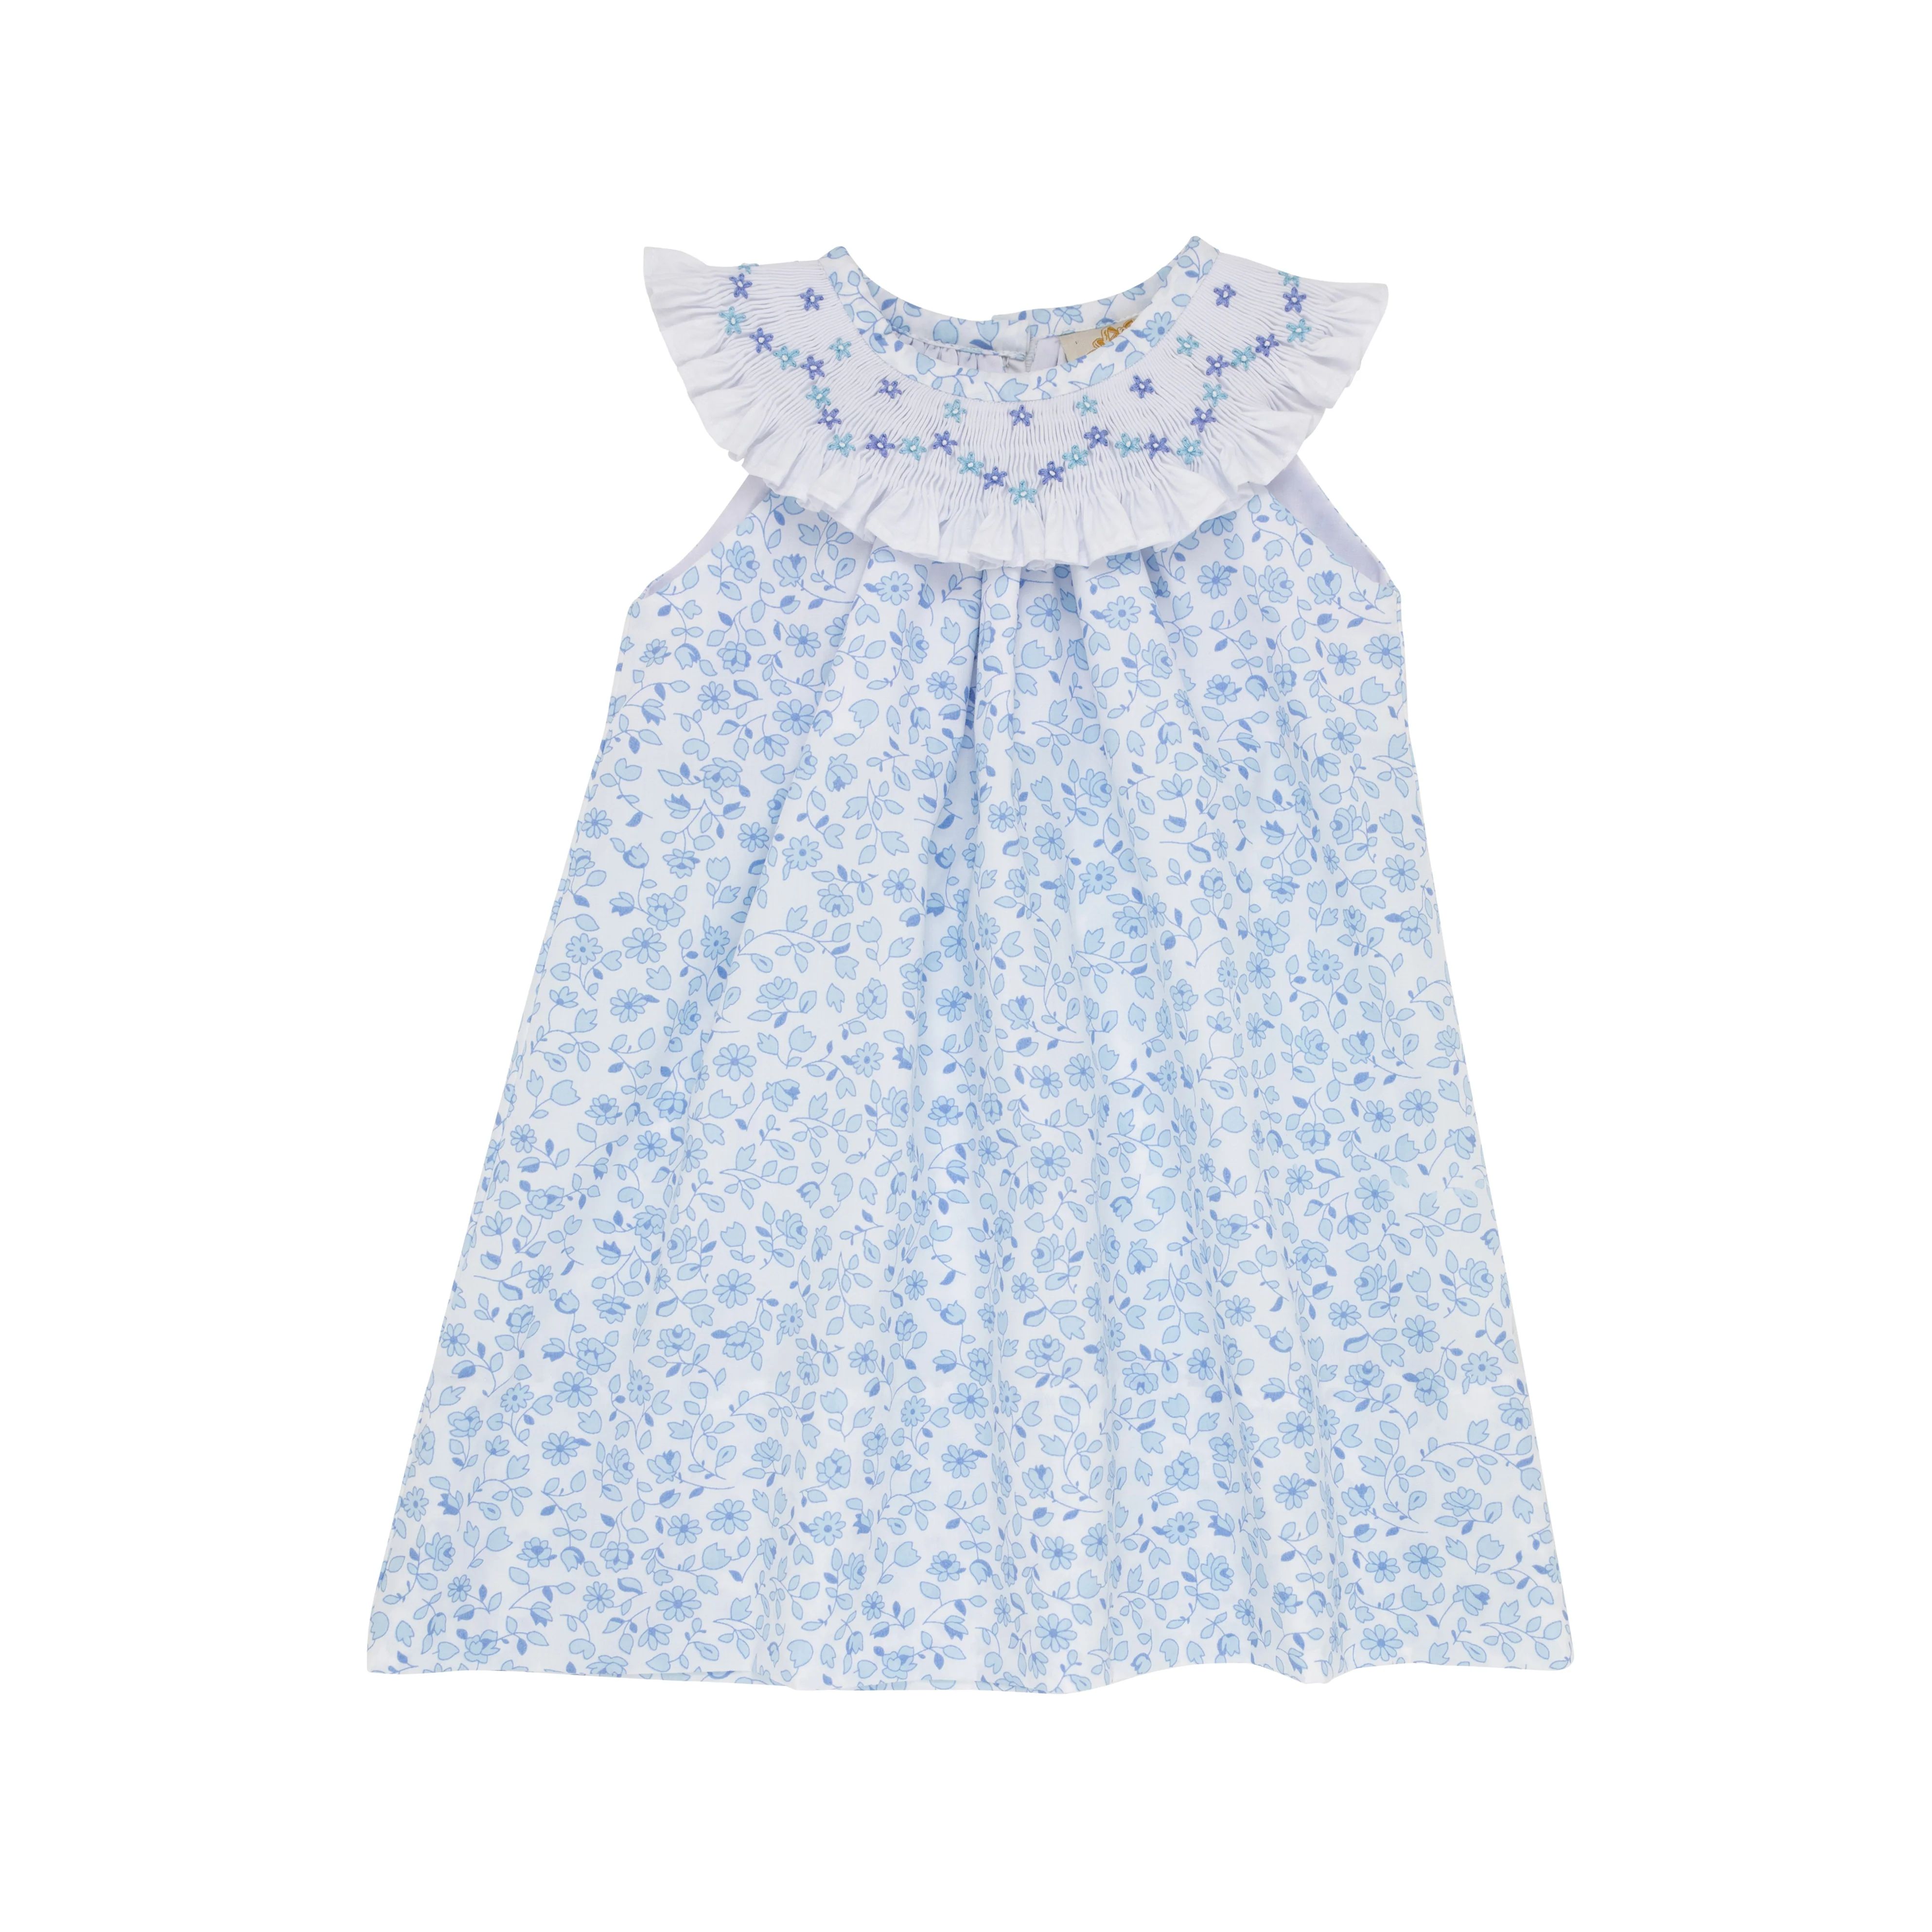 Sleeveless Sandy Smocked Dress - Greenbriar Garden with Worth Avenue White | The Beaufort Bonnet Company